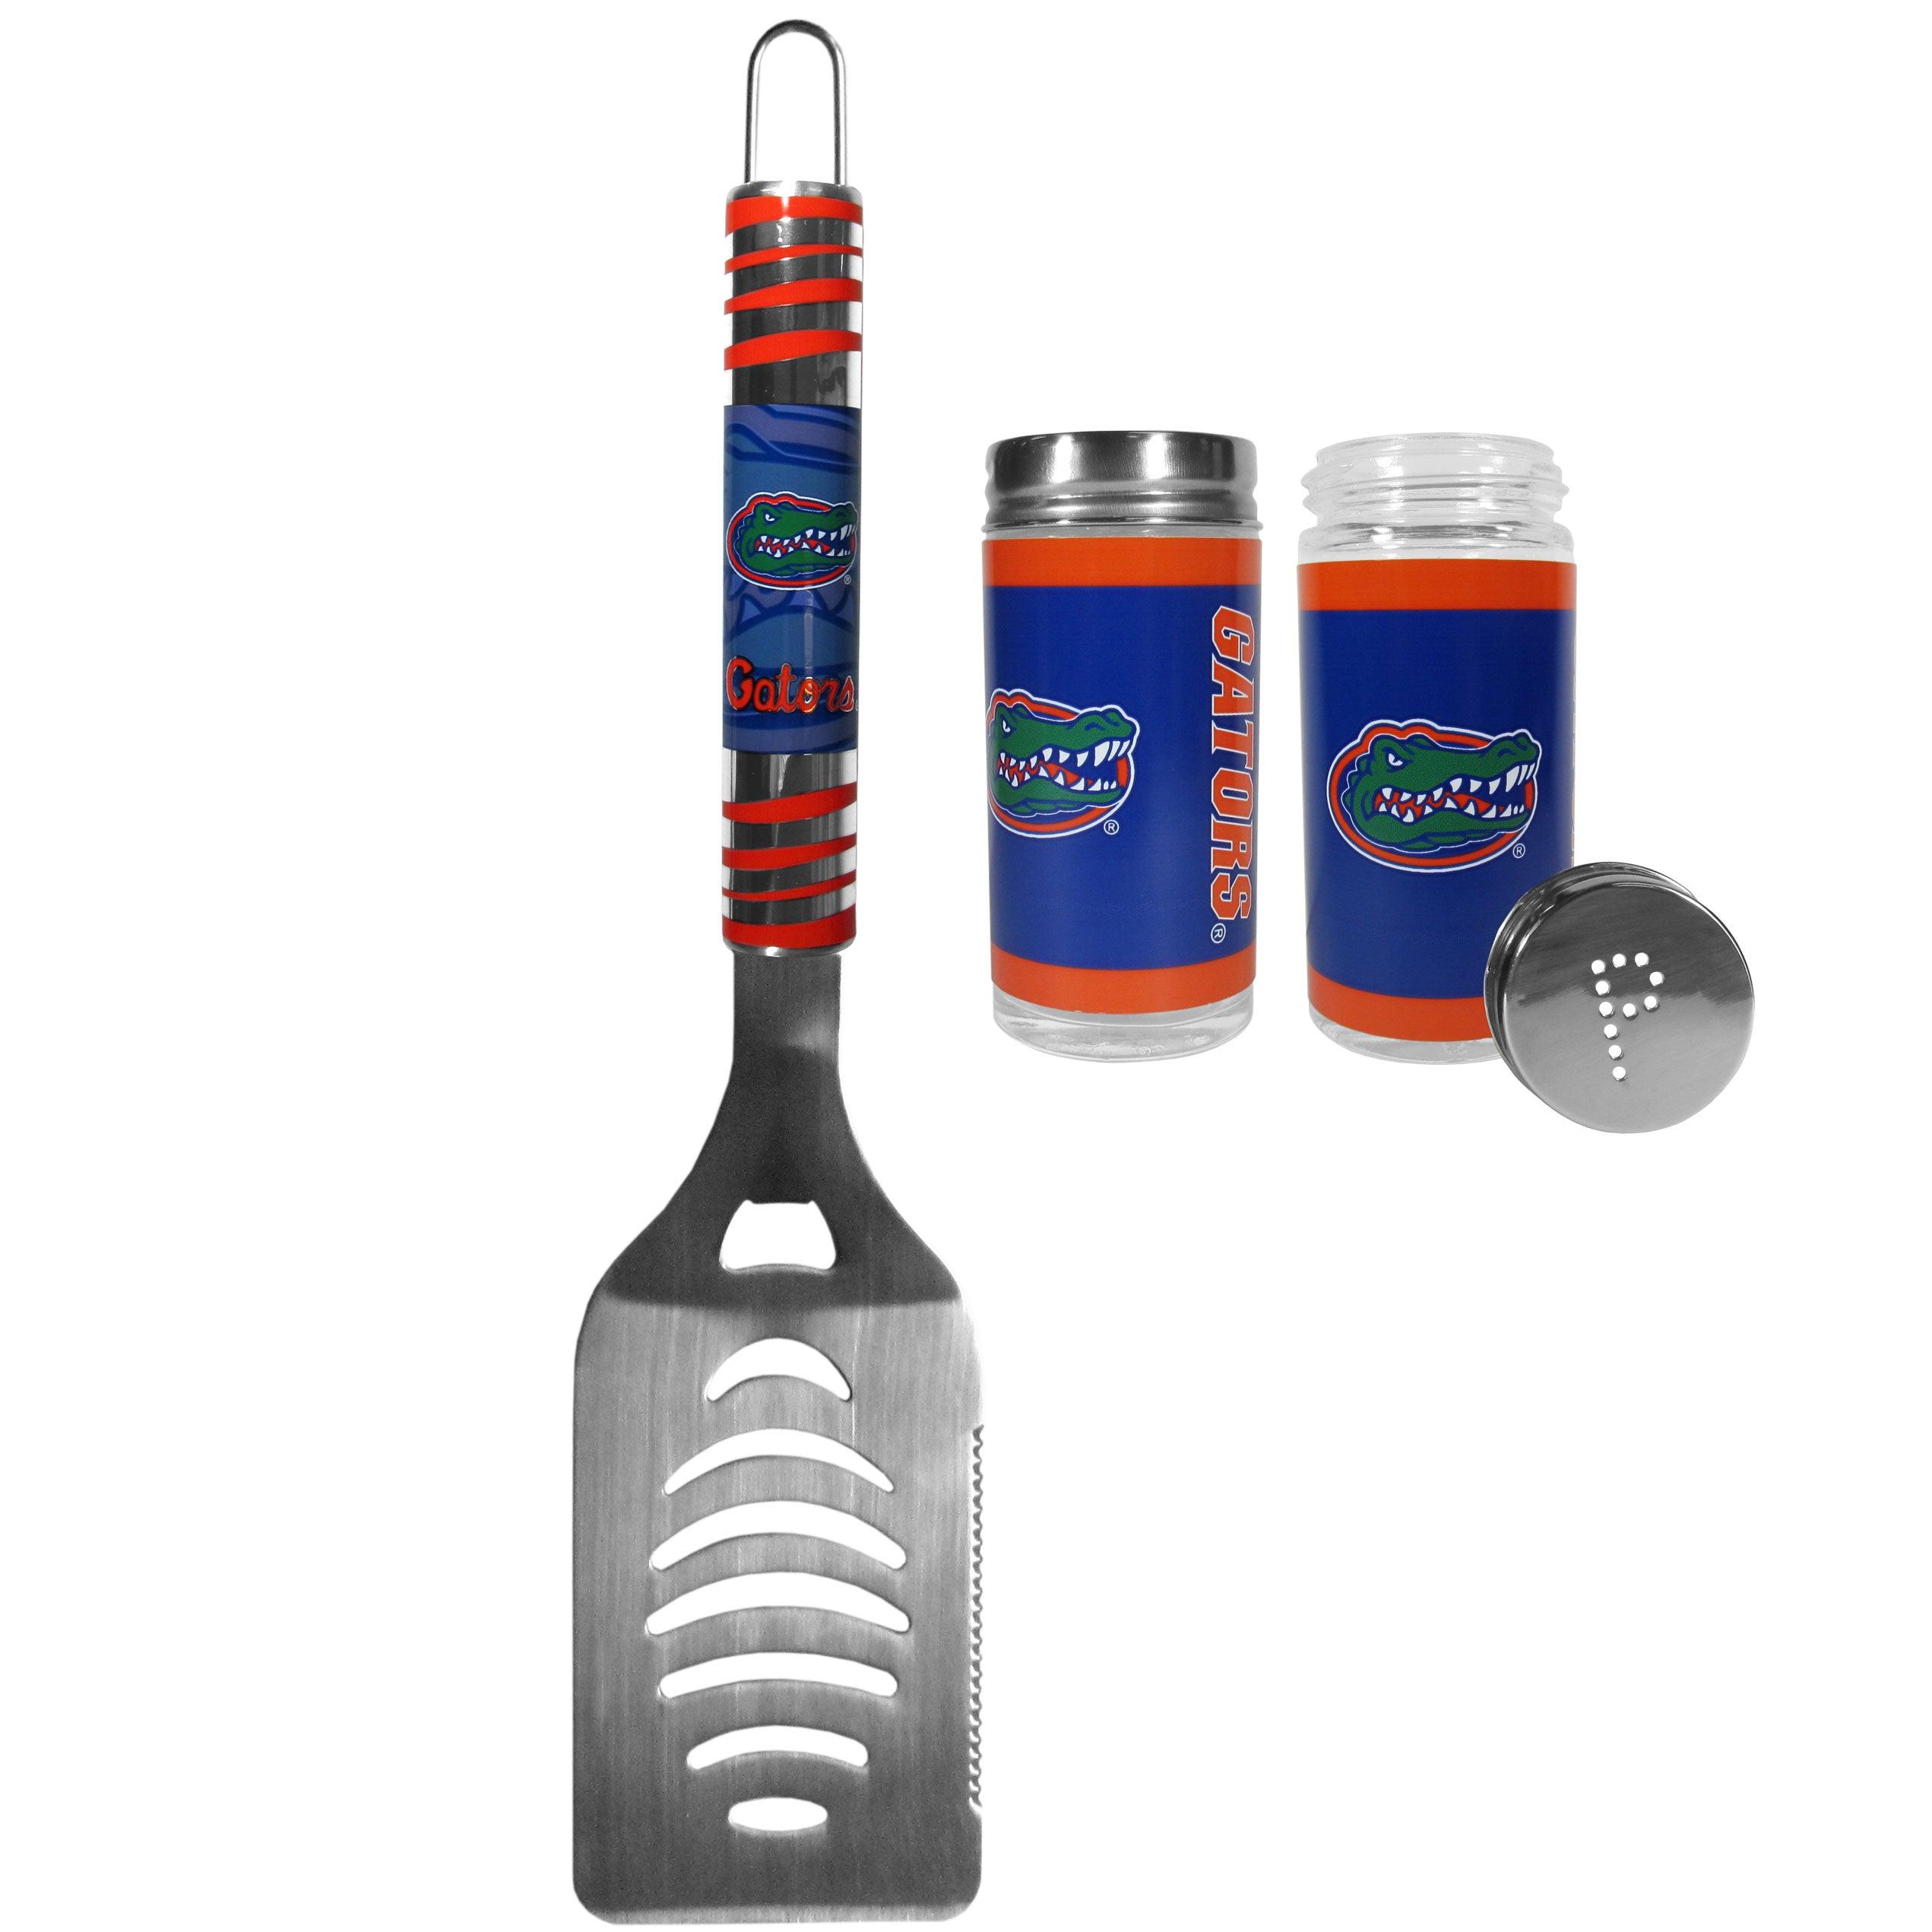 Florida Gators Tailgater Spatula and Salt and Pepper Shakers - Flyclothing LLC